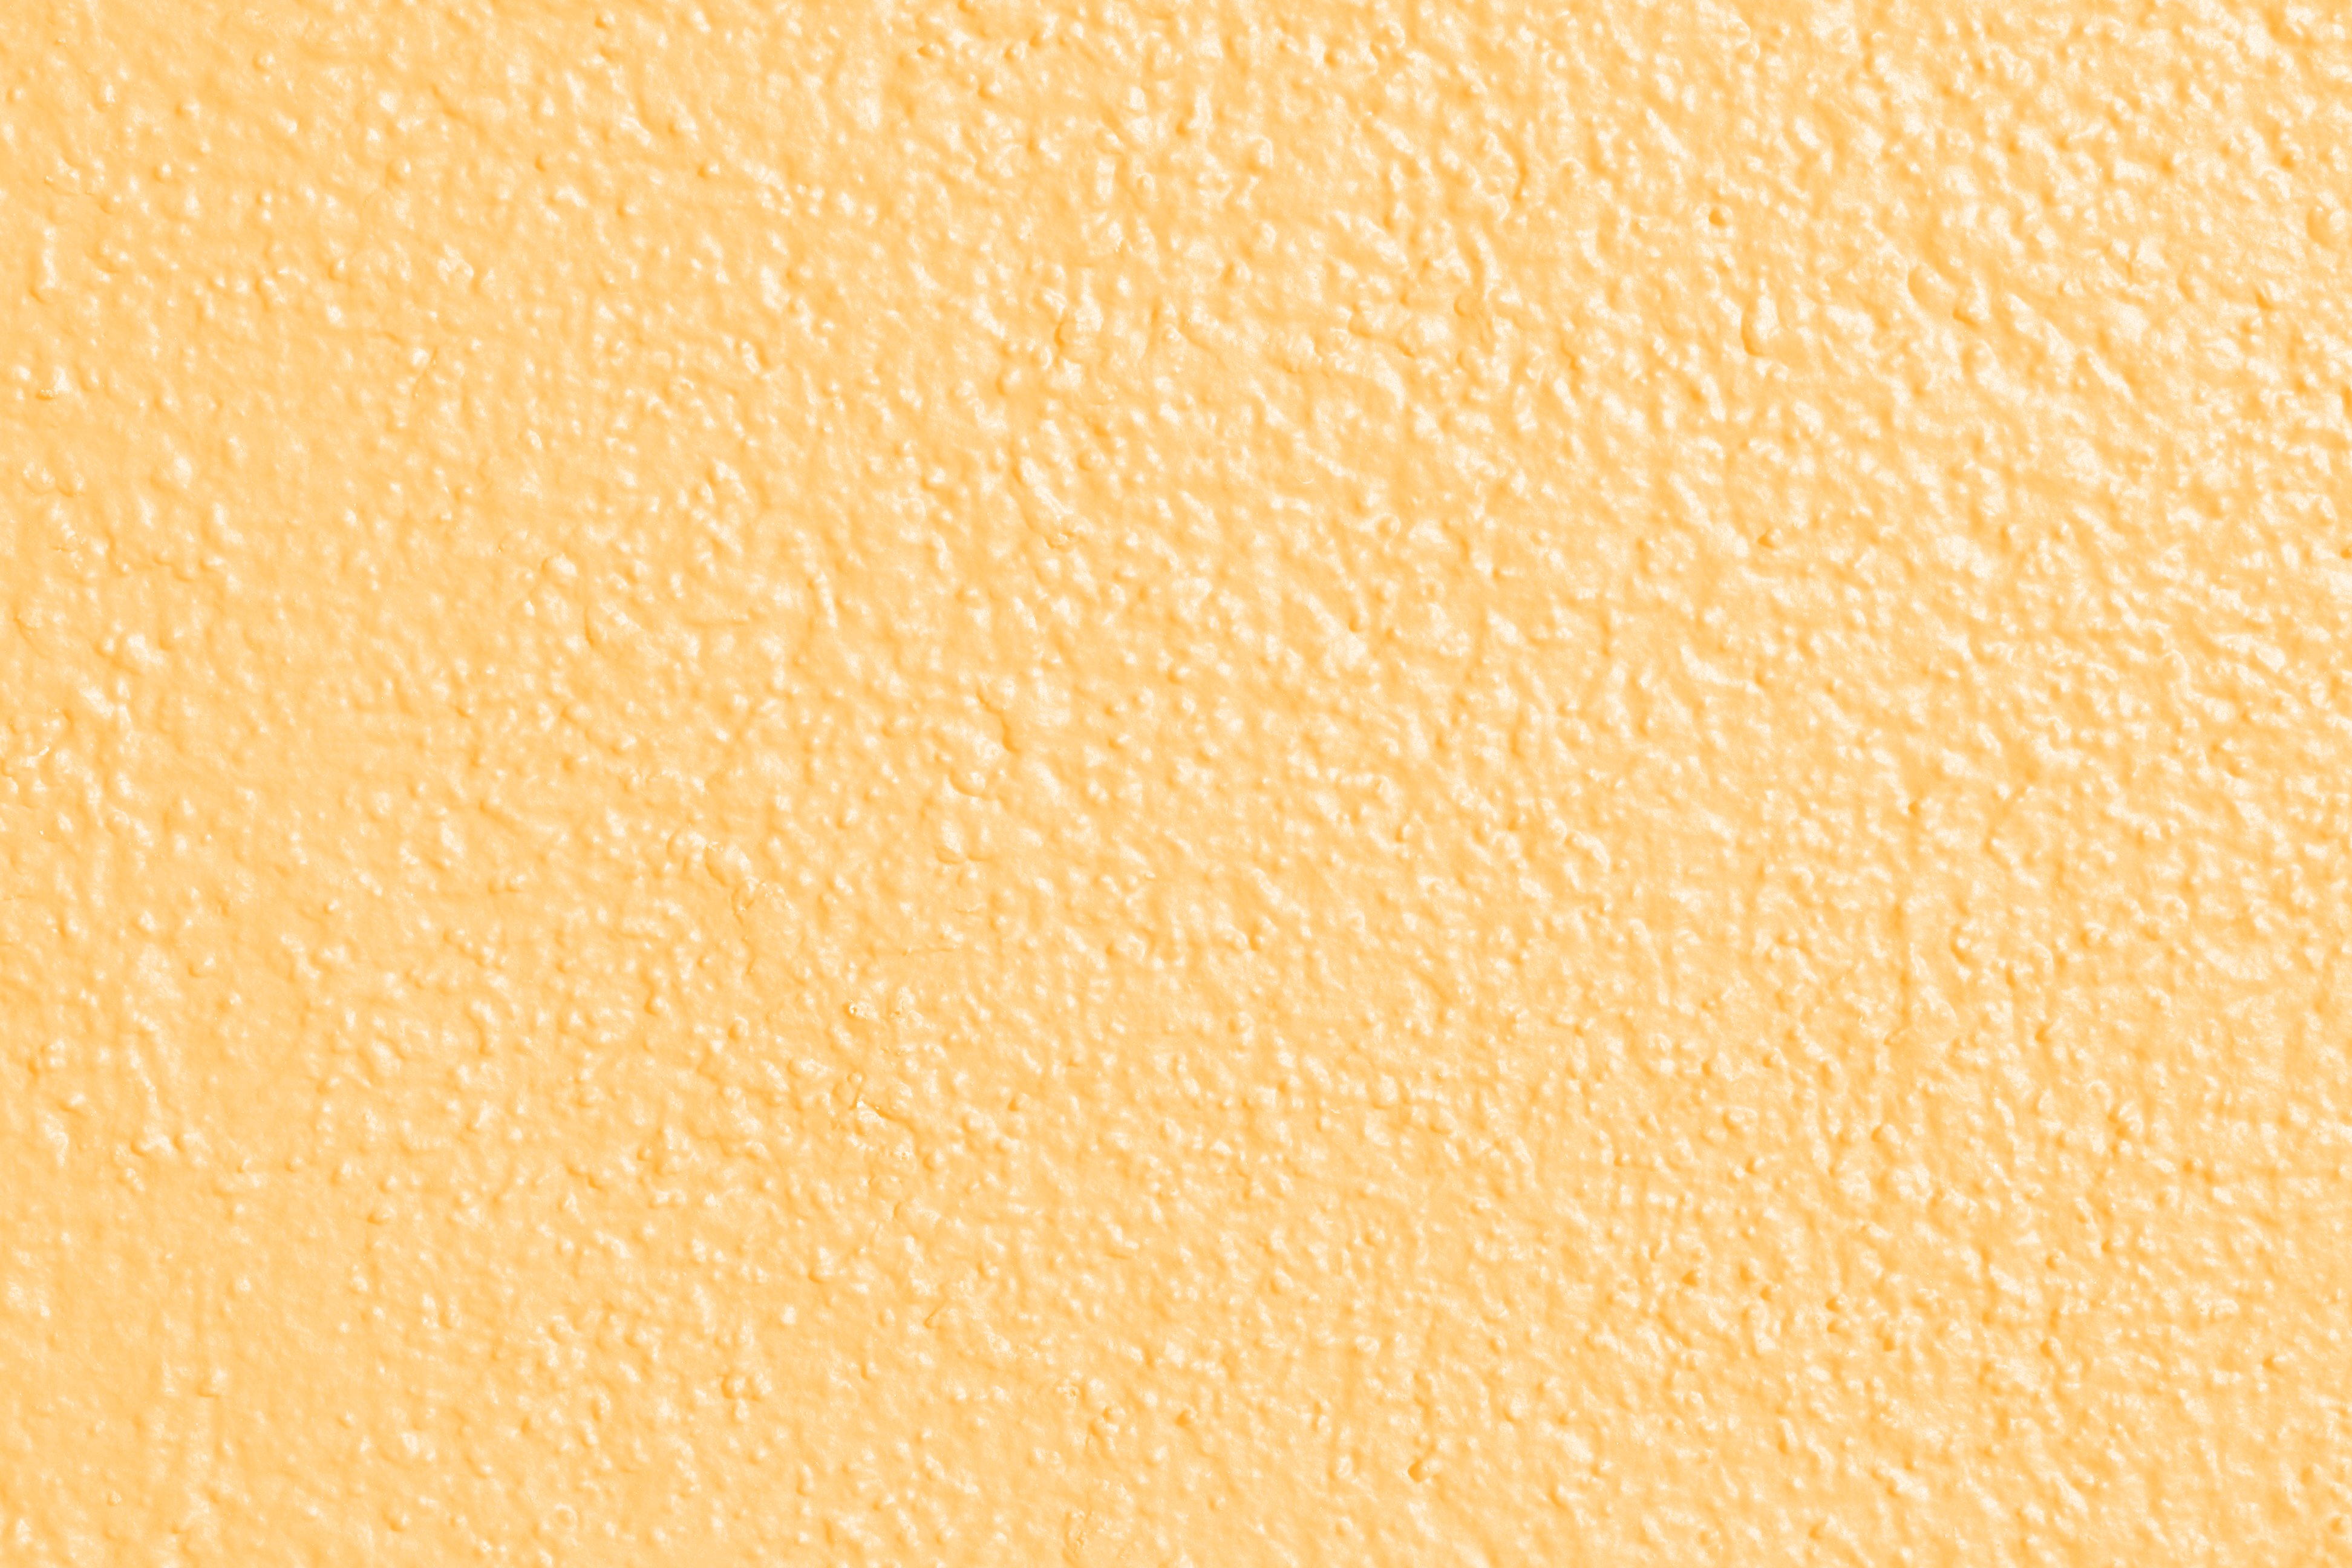 Light Orange Colored Painted Wall Texture High Resolution Photo